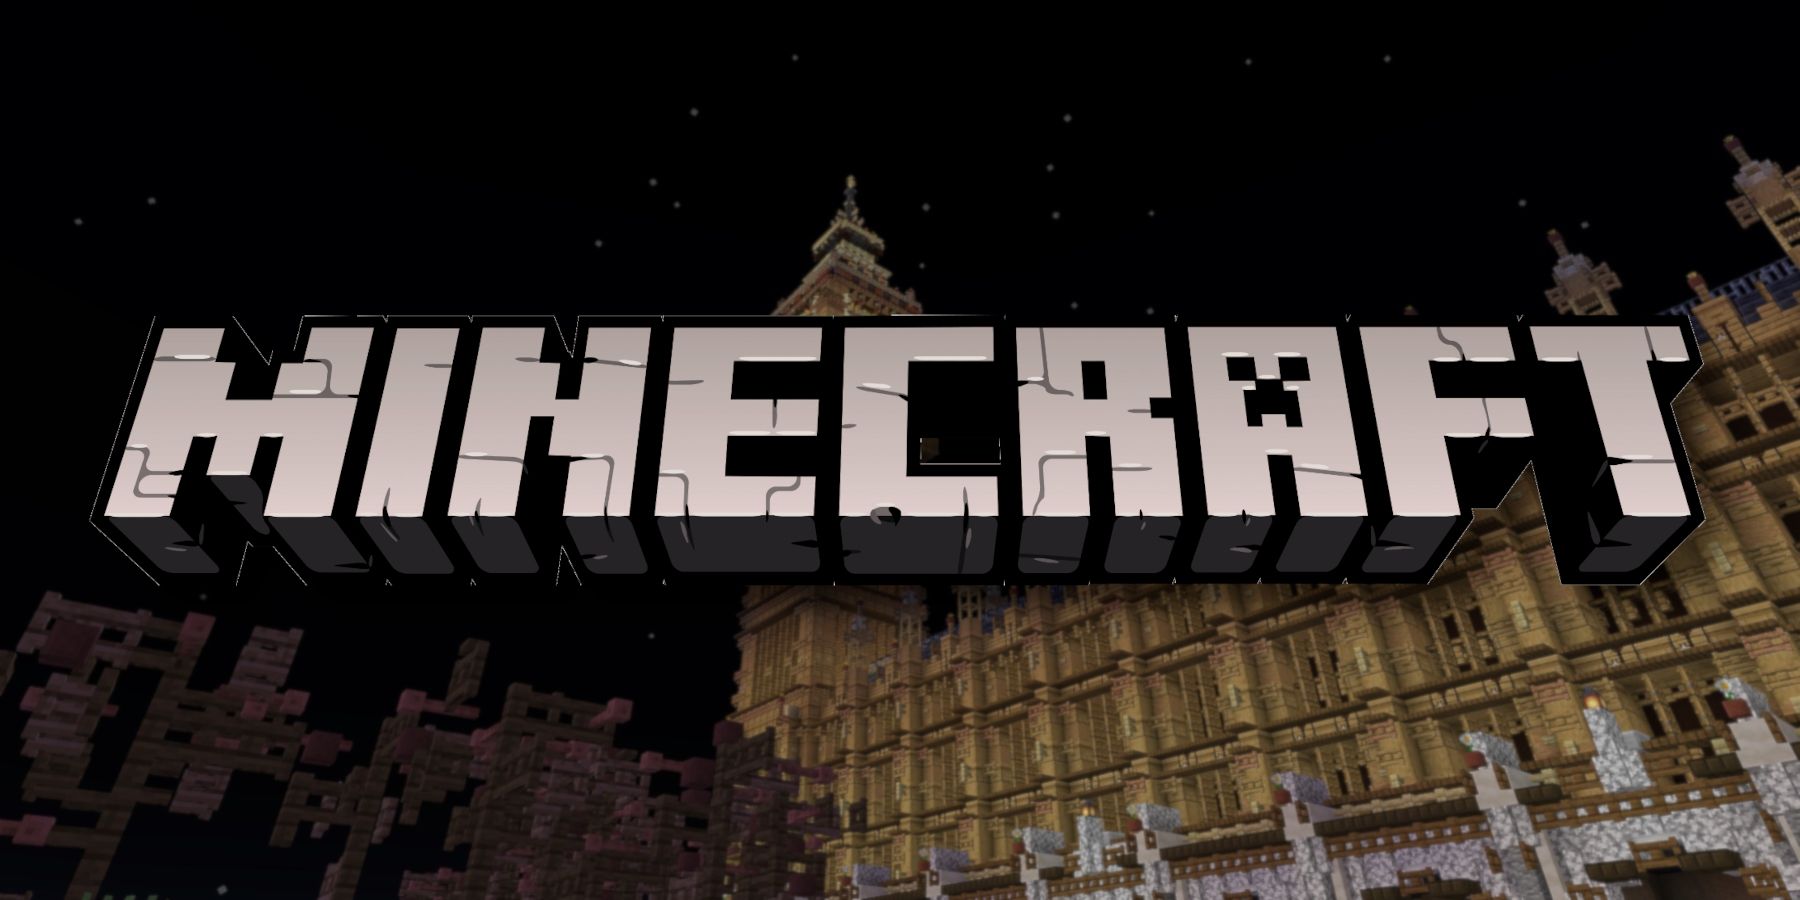 The Minecraft logo with the House of Parliament behind it.